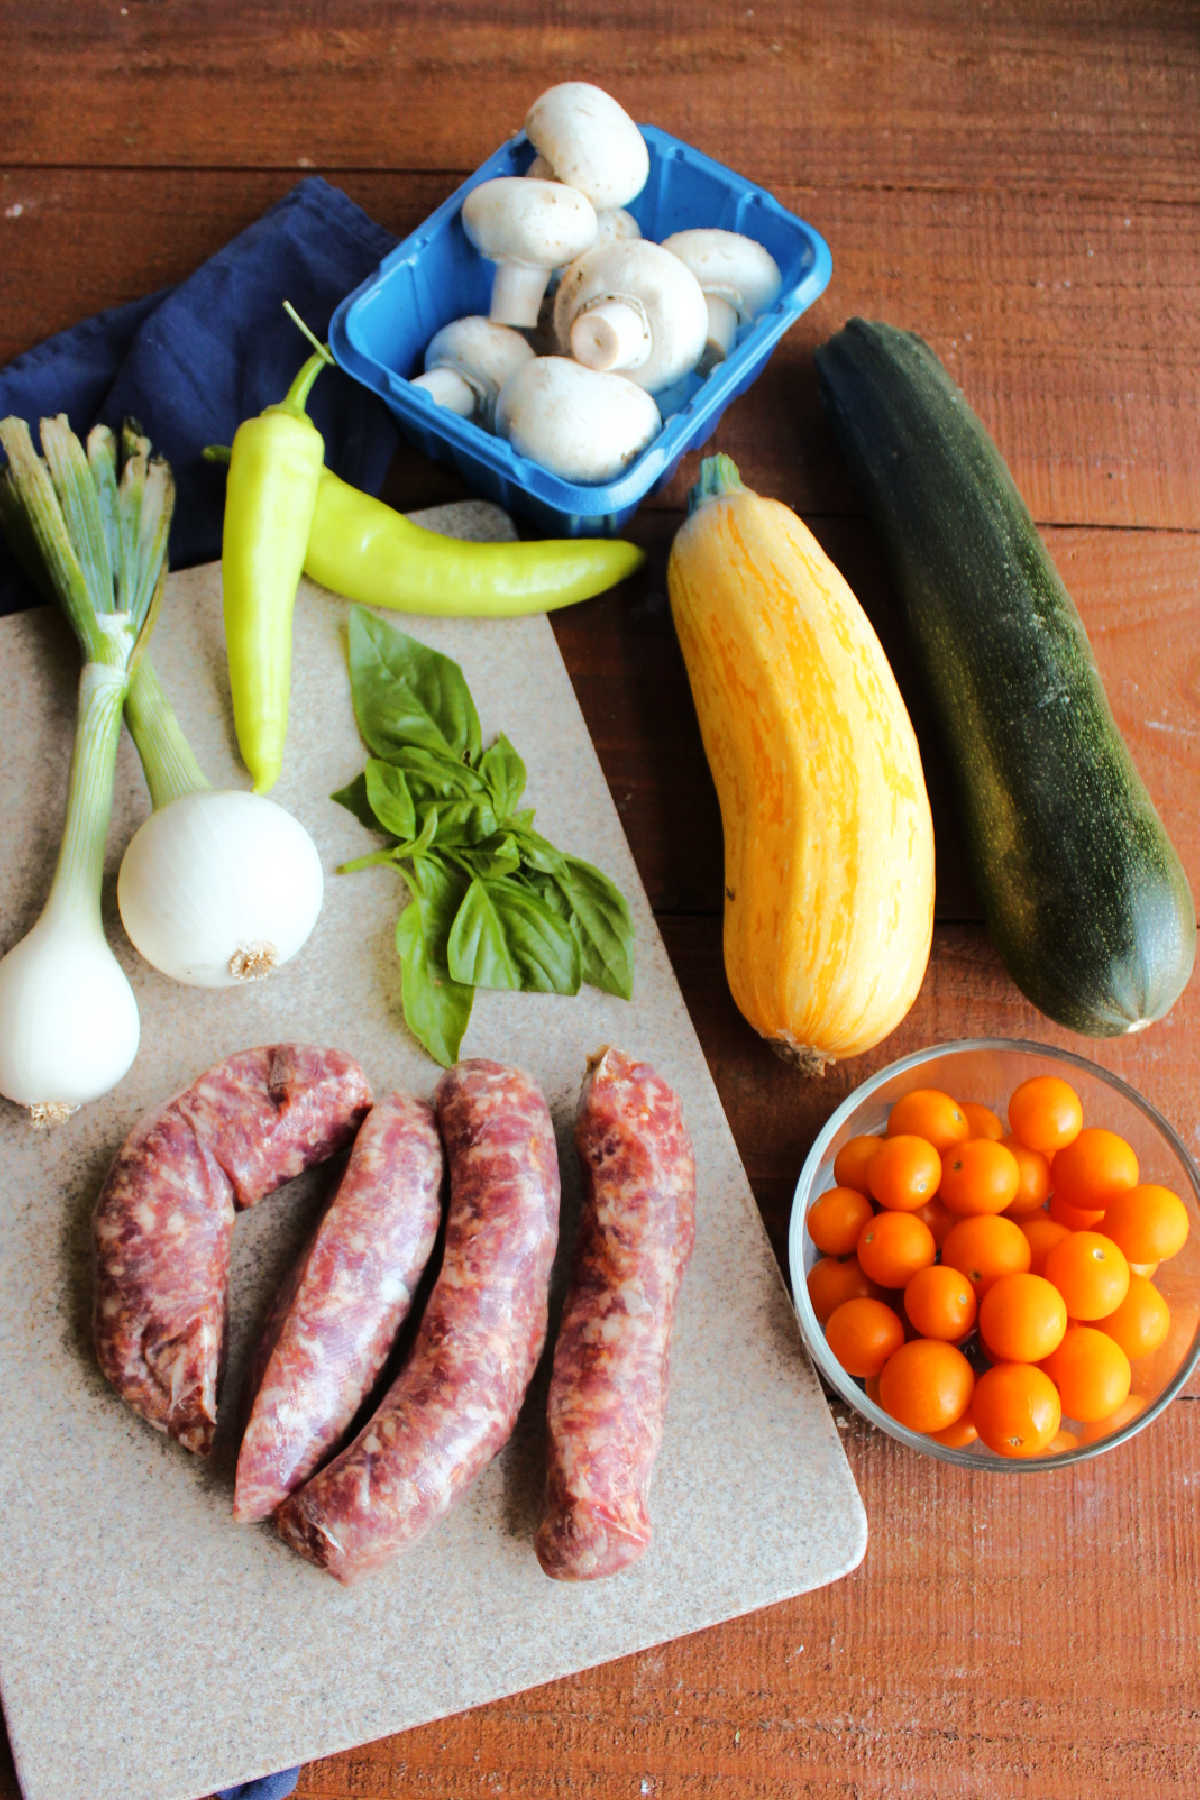 Ingredients including Italian sausage links, zucchini, yellow squash, cherry tomatoes, basil, spring onions, banana peppers and button mushrooms ready to be made into sheet pan meal.